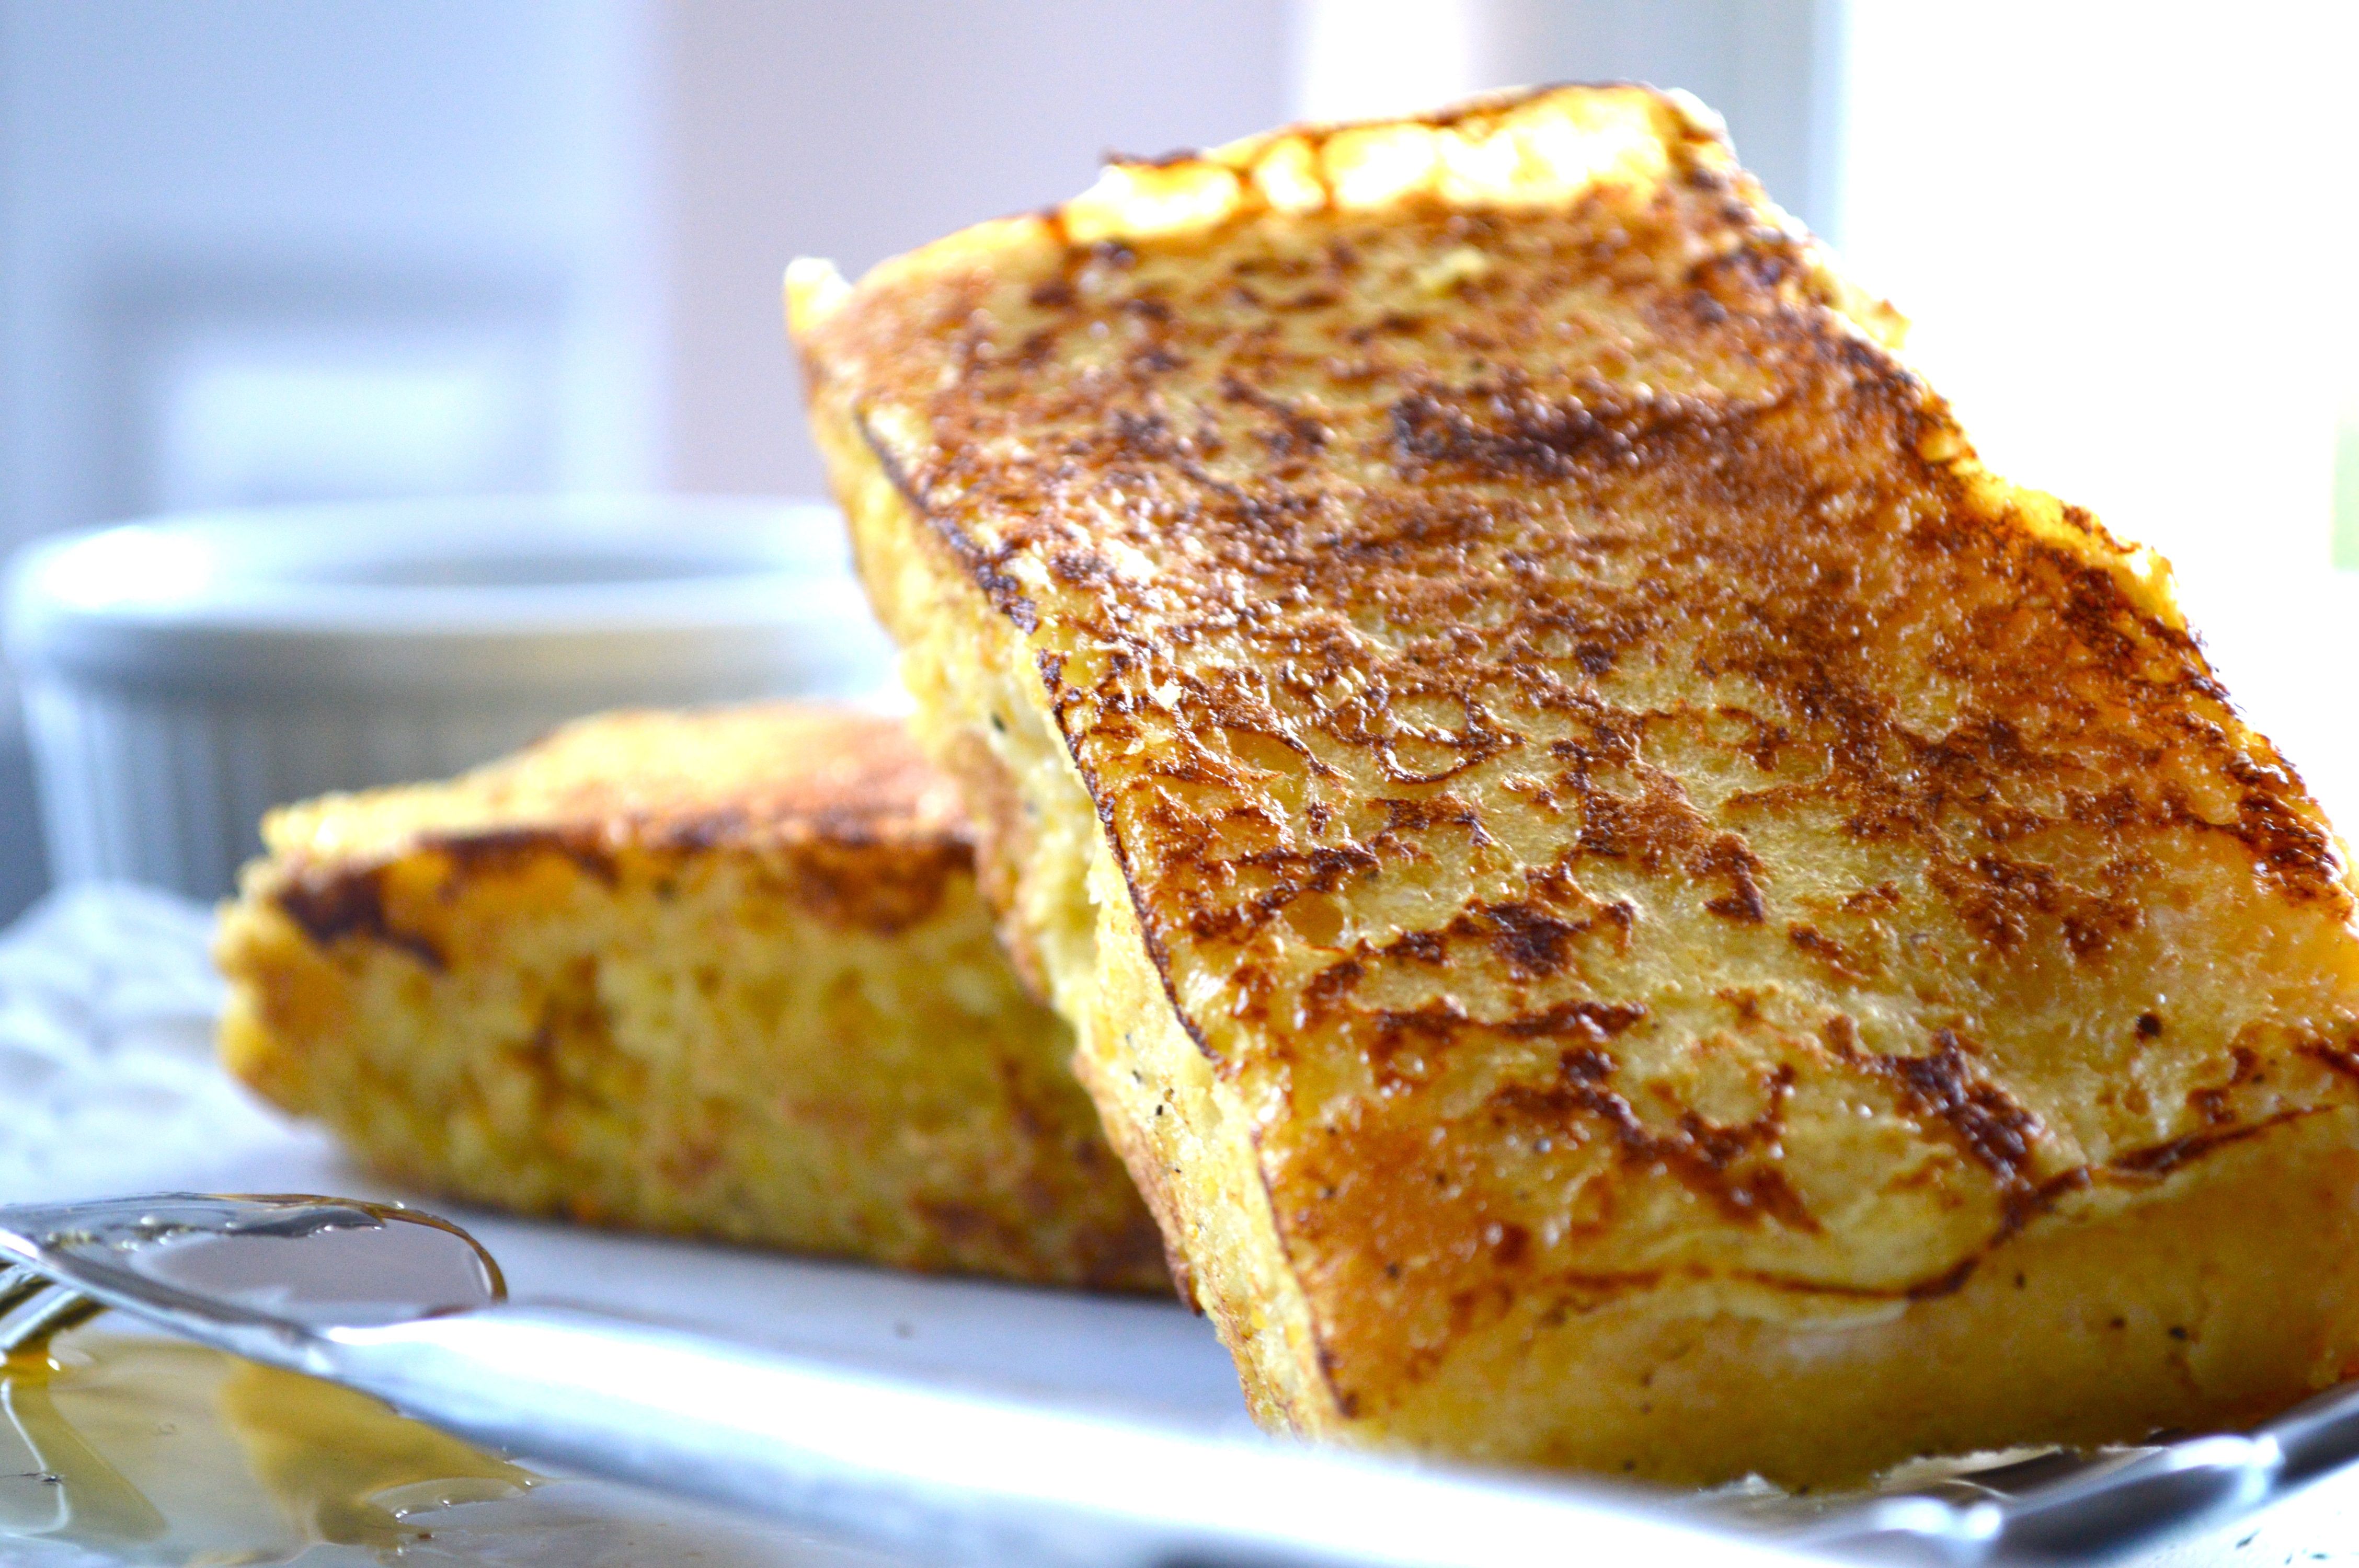 French Toast Wallpaper Background 61432 4512x3000 px